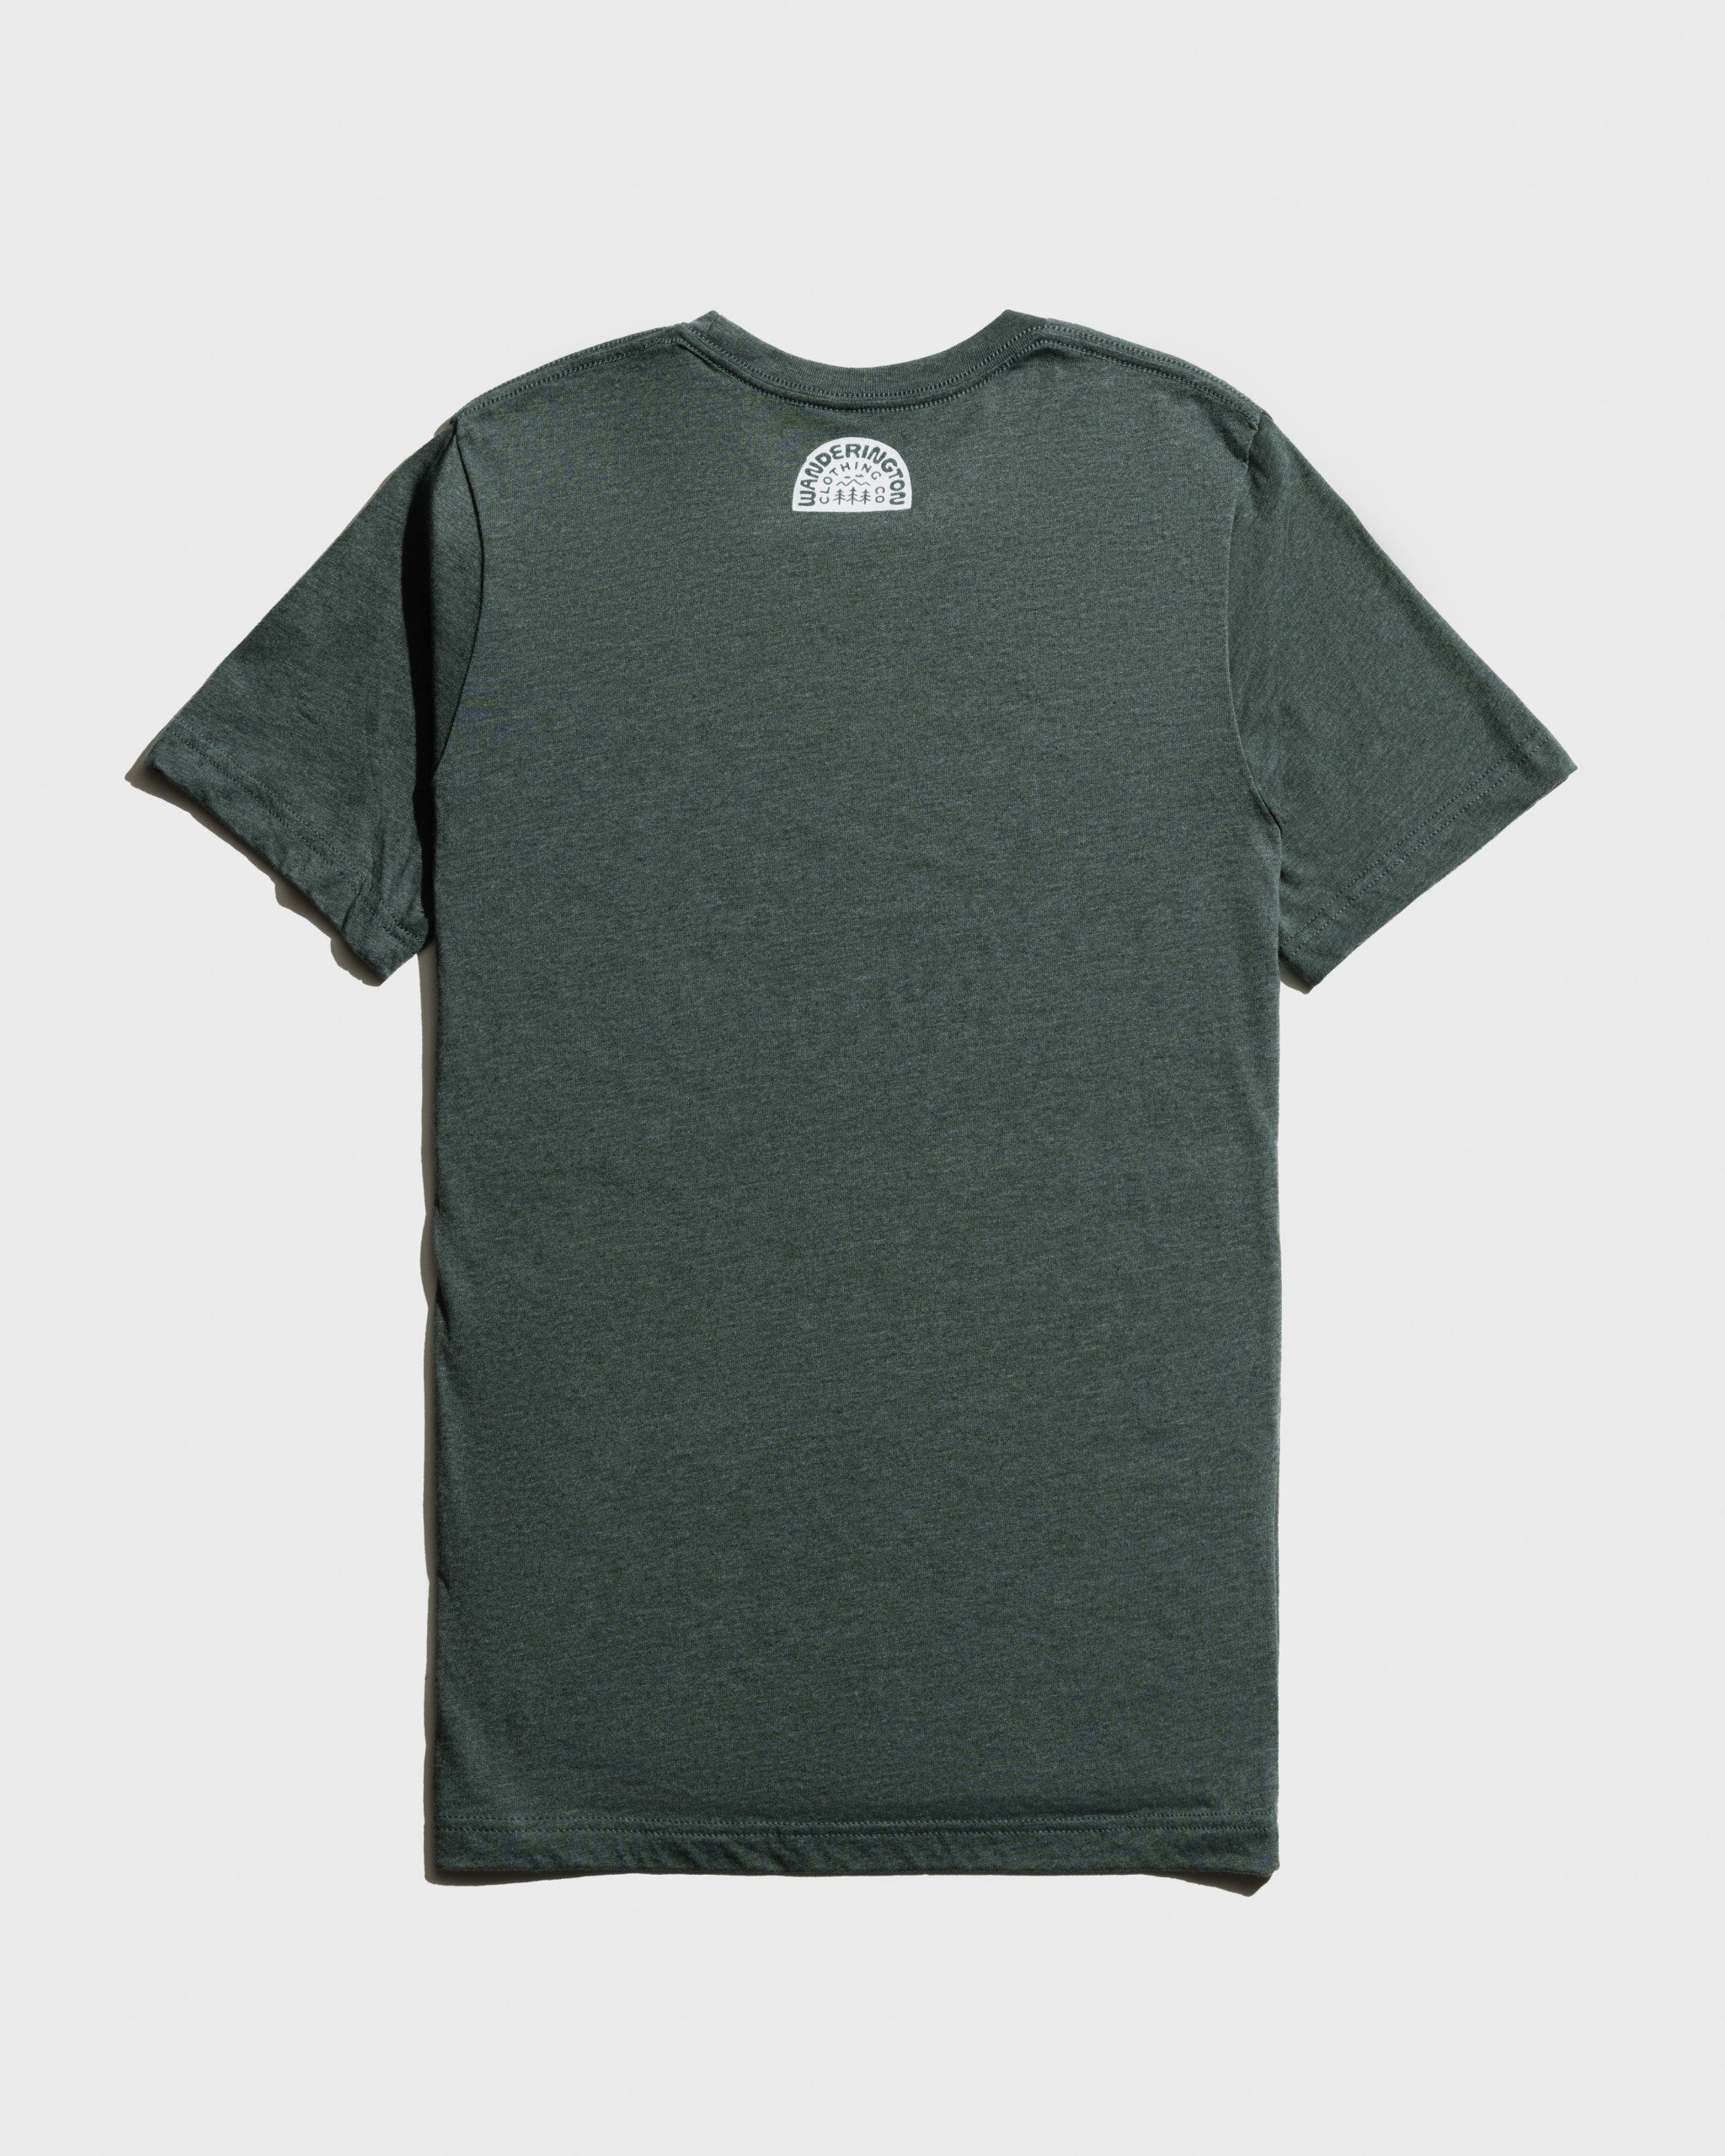 Evergreen State of Mind Tee | The Wanderington Clothing Co